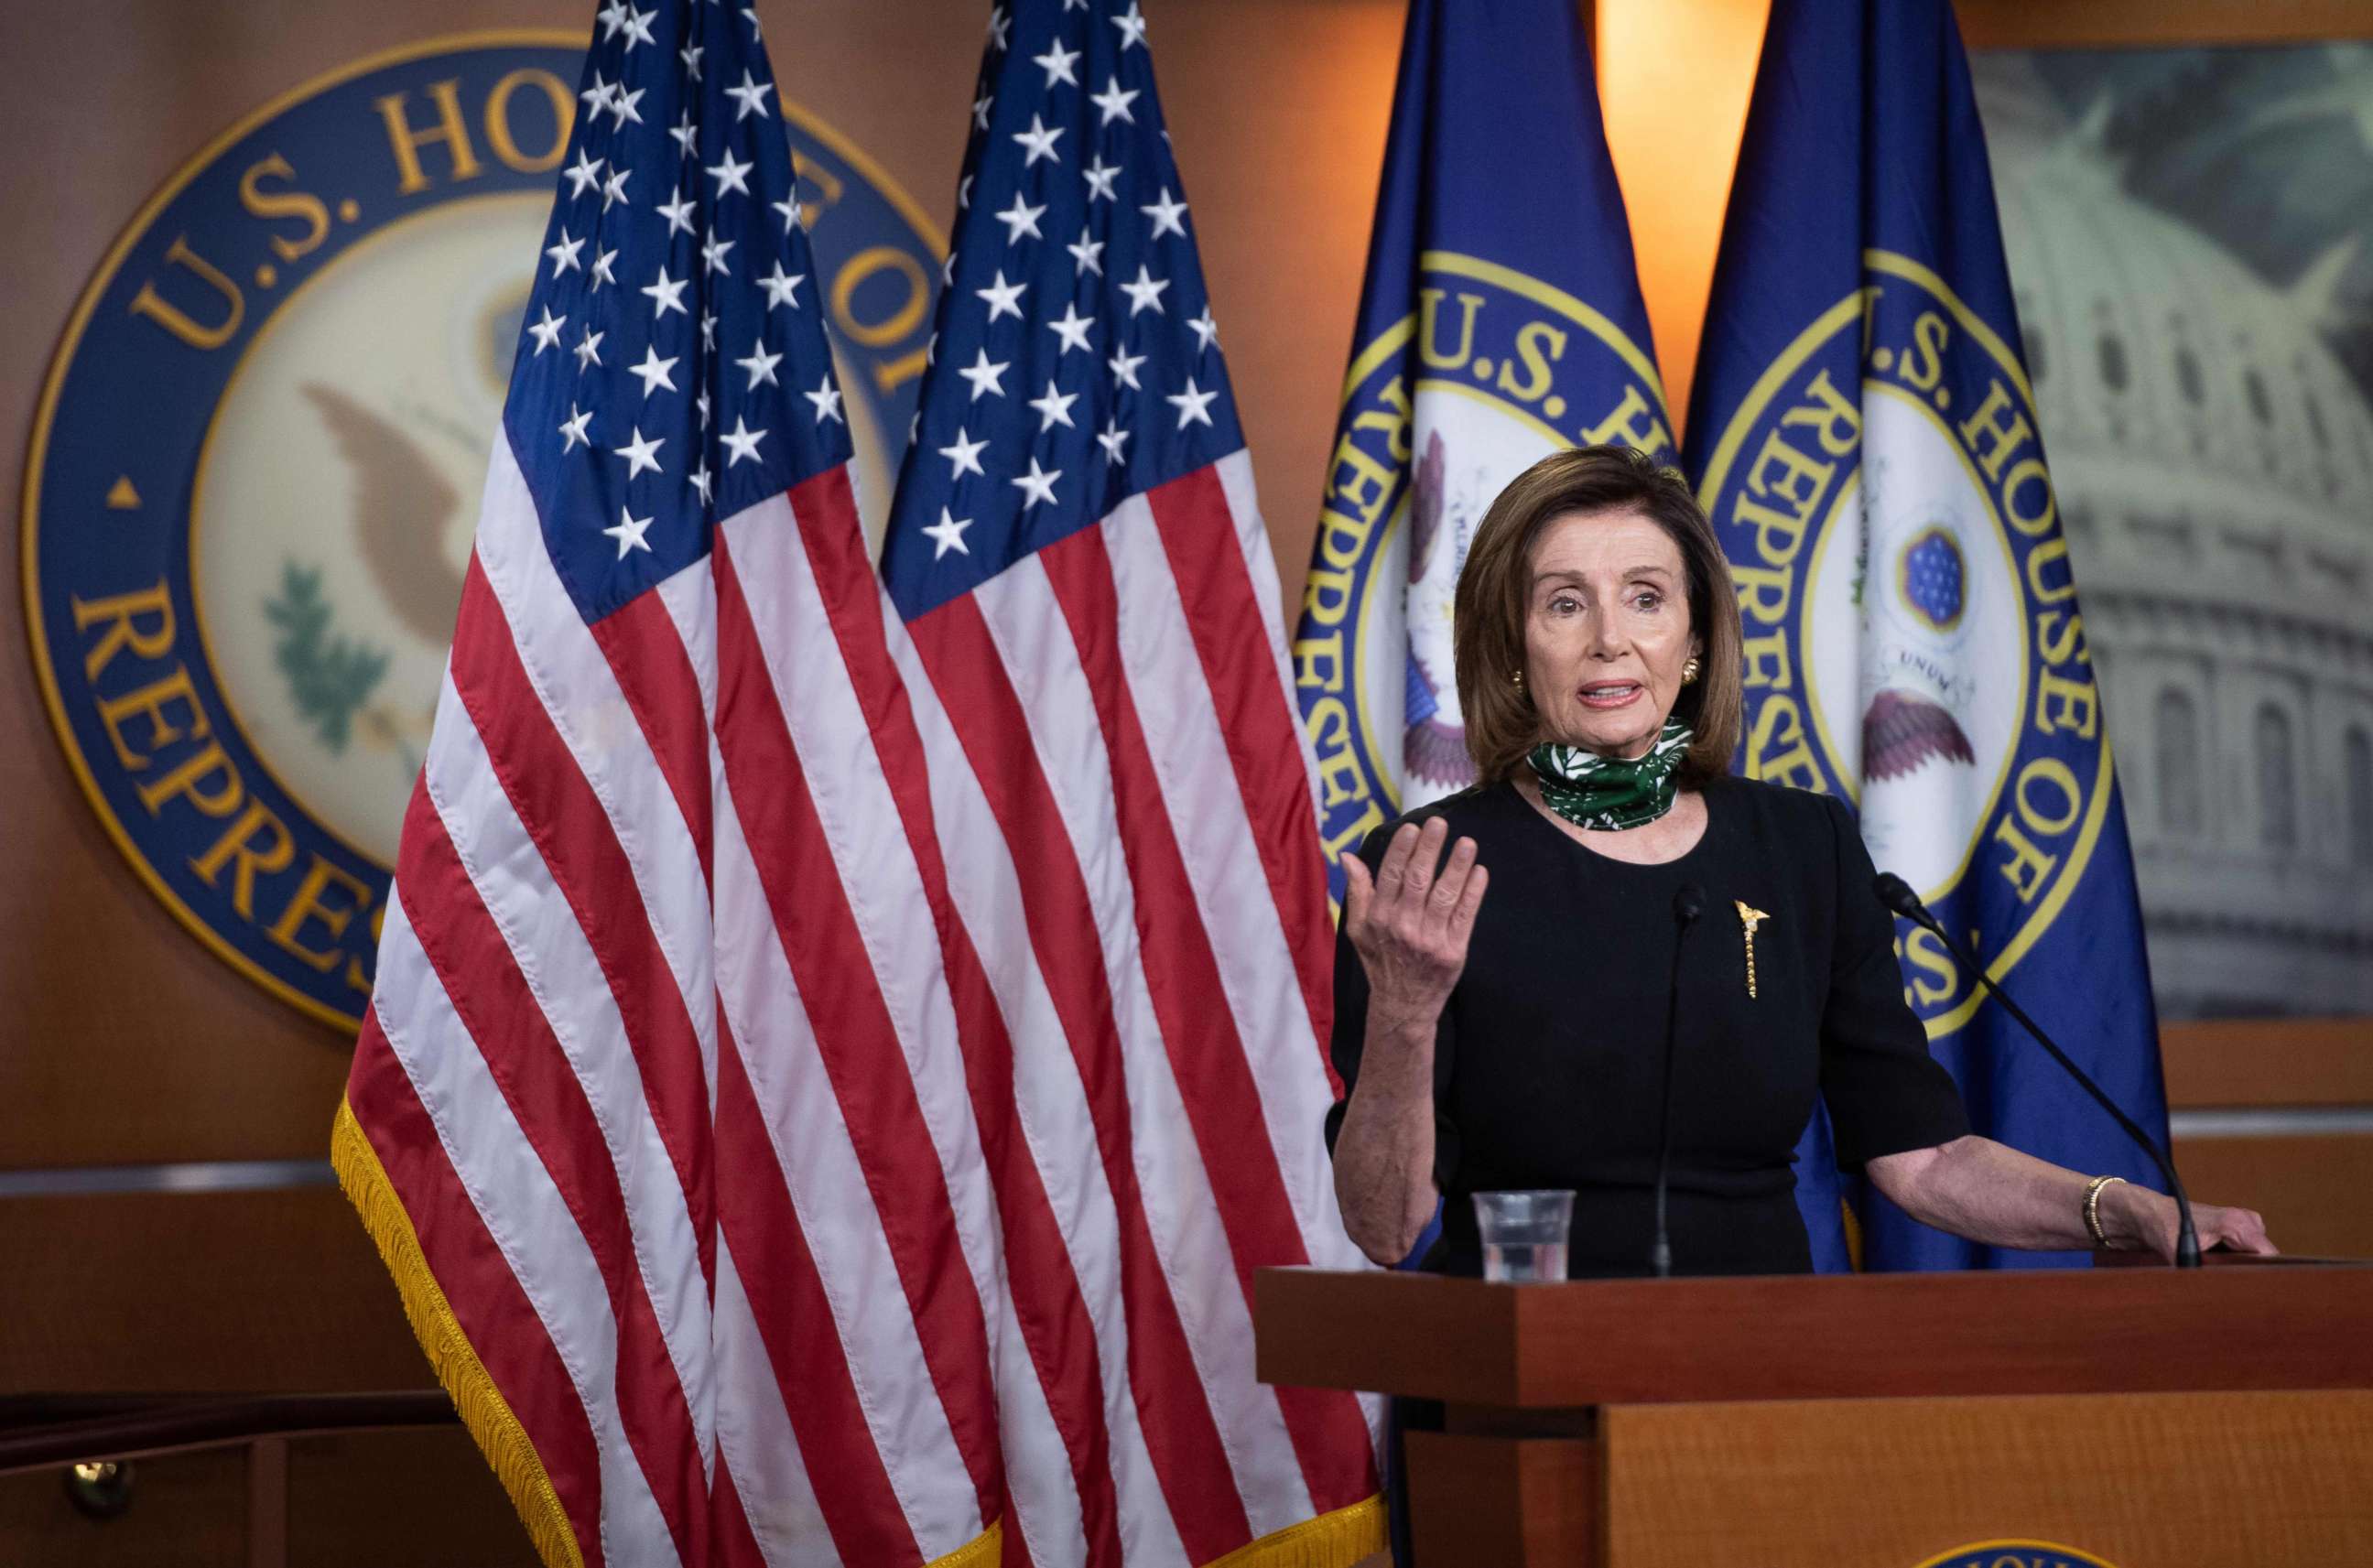 PHOTO: Speaker of the House Nancy Pelosi speaks during her weekly press conference on Capitol Hill in Washington, May 14, 2020.